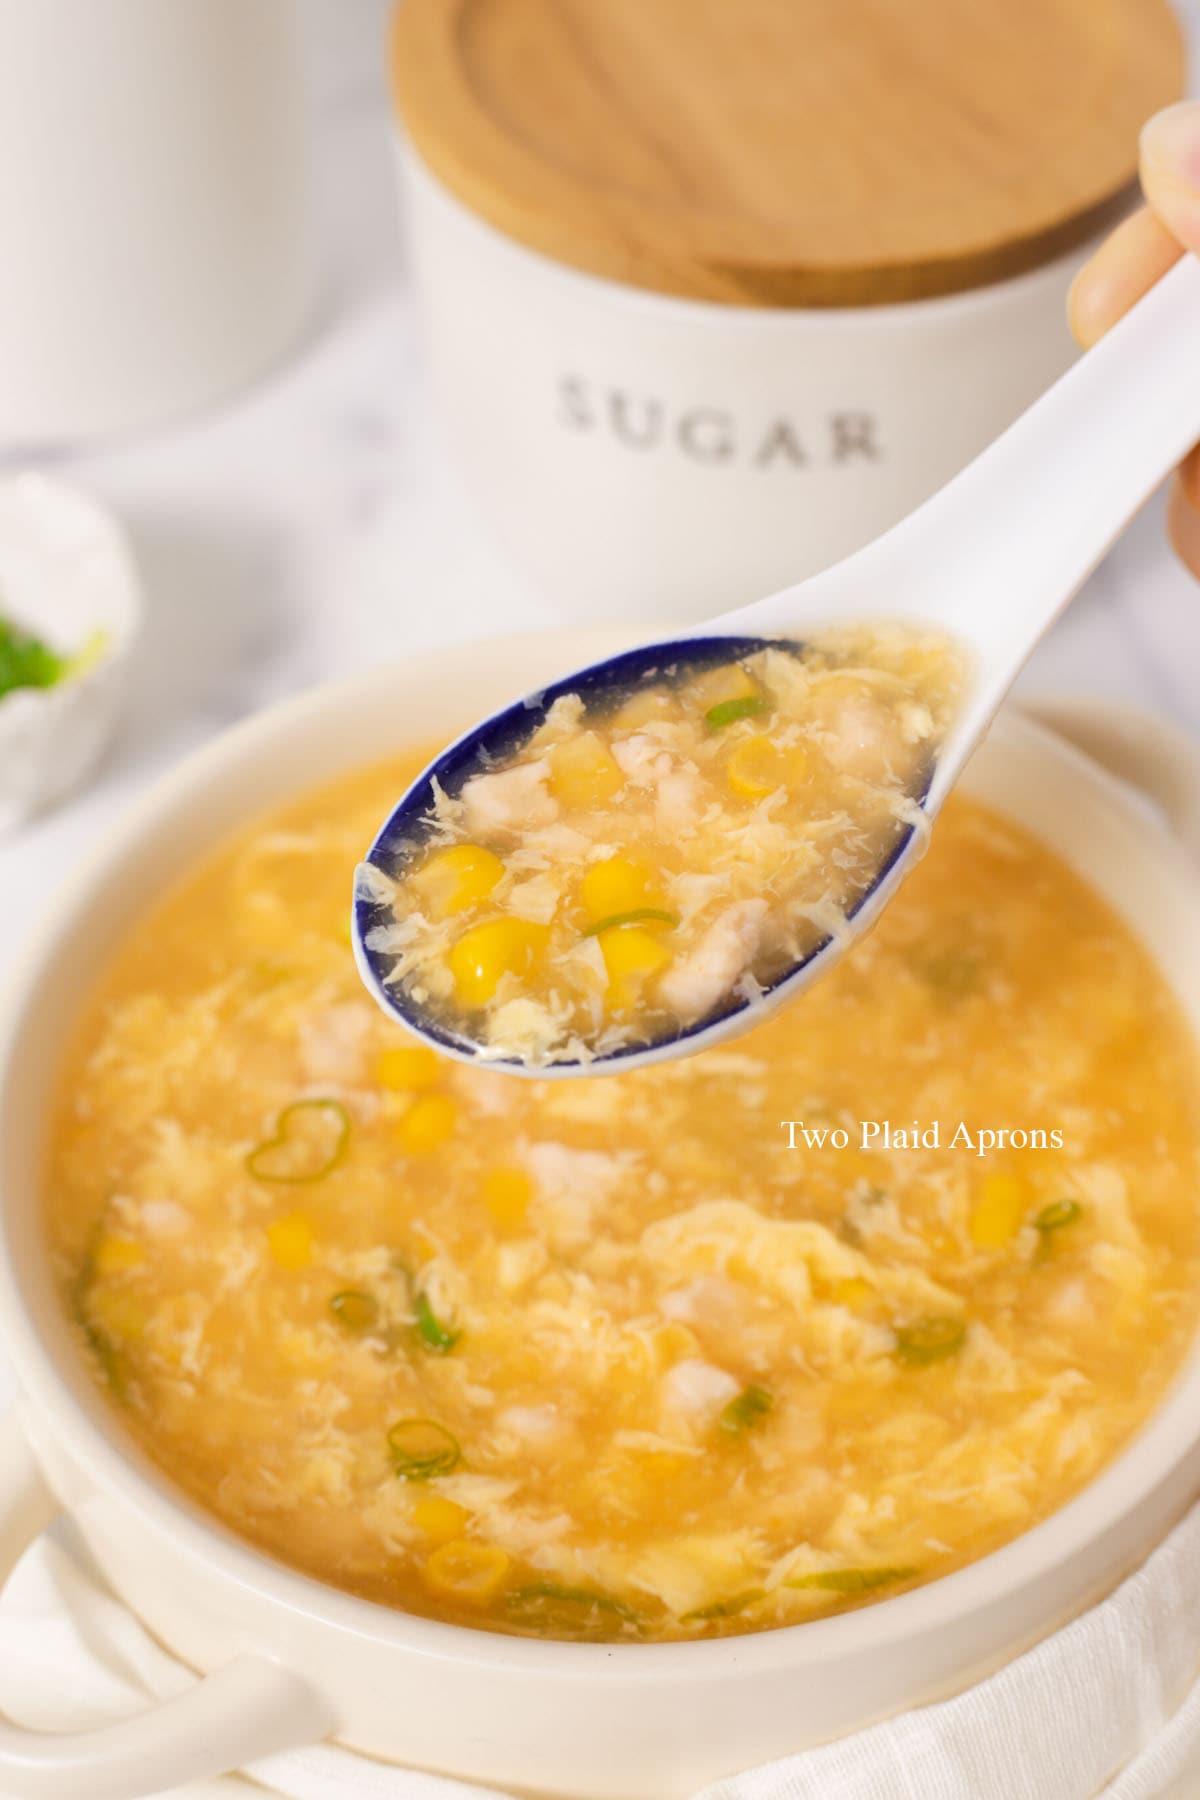 Spoon with chicken and corn soup.